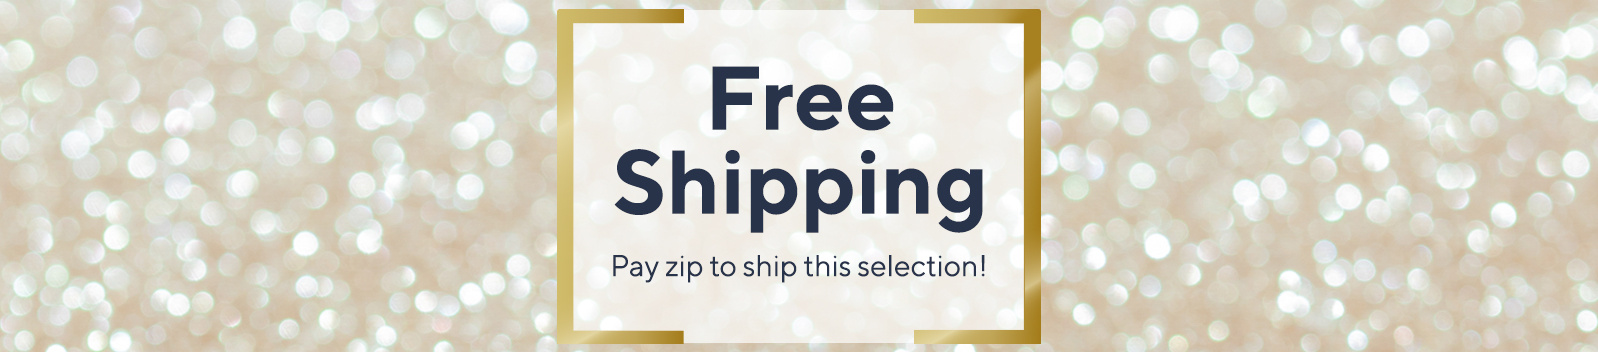 Free Shipping  Pay zip to ship this selection!